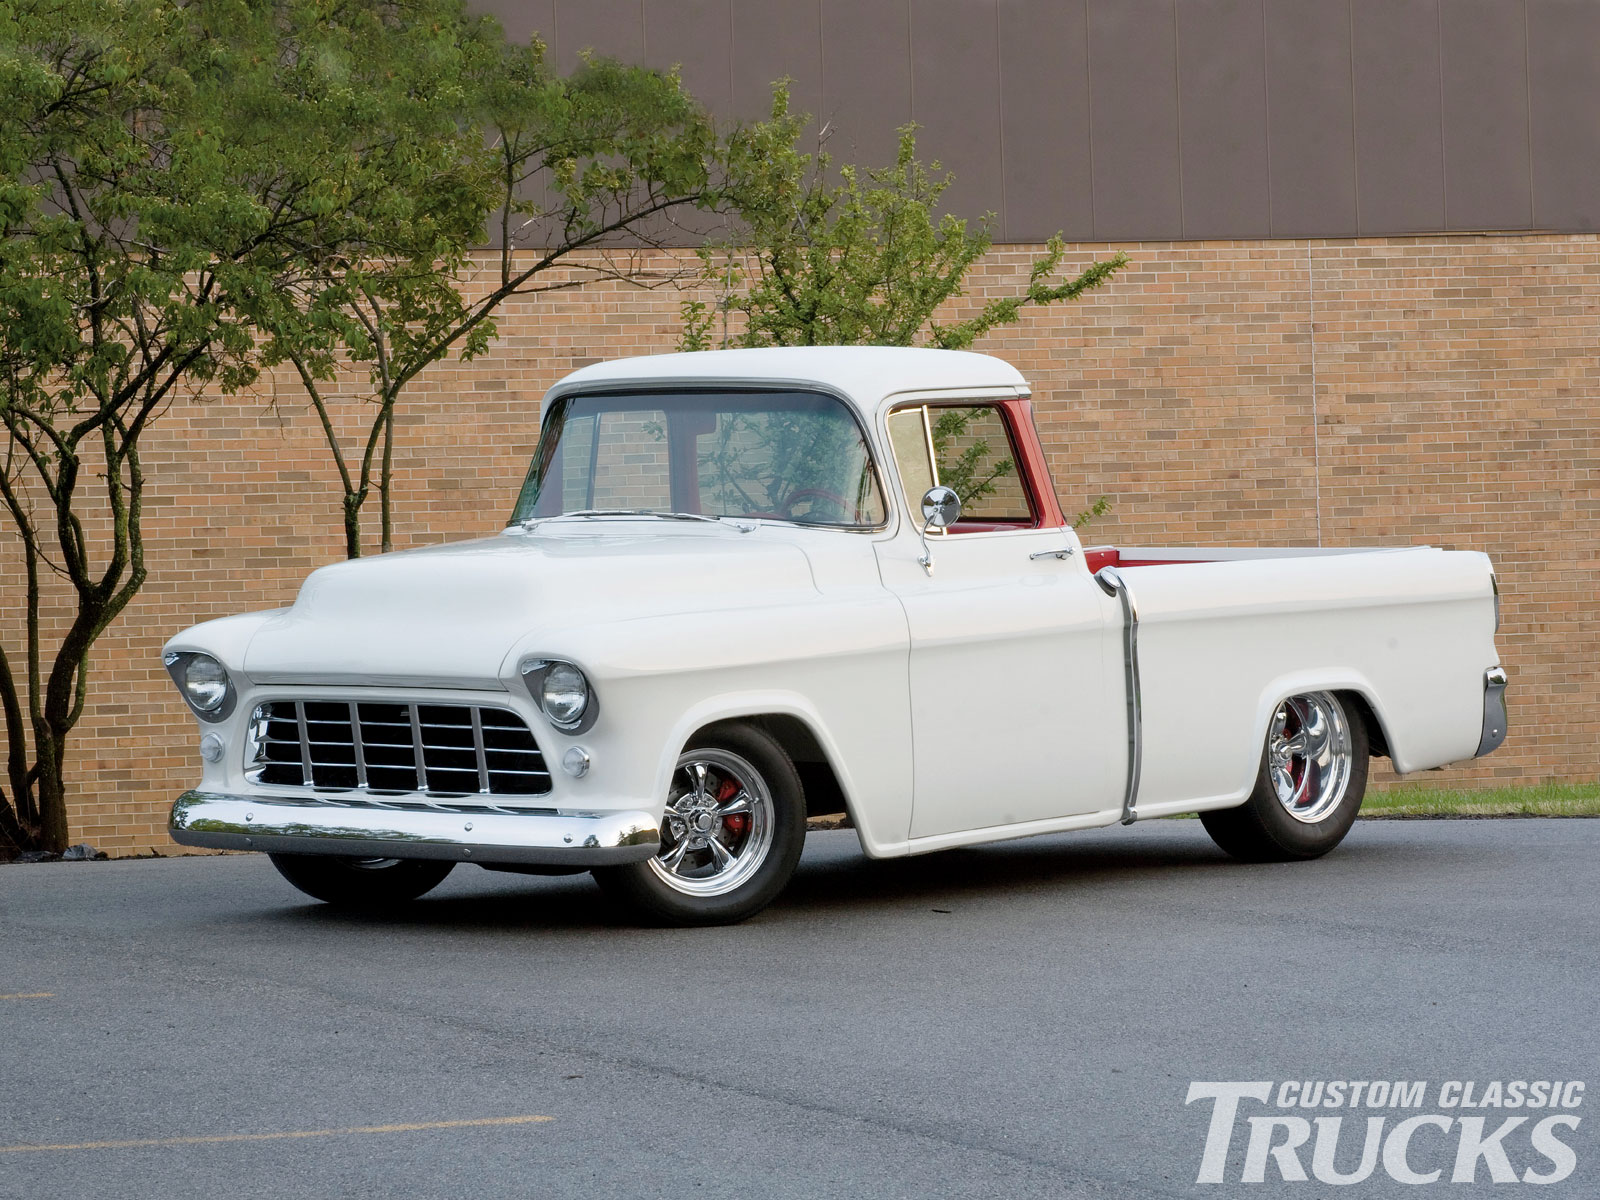 1955 Chevy Cameo Pickup Truck   Built To Drive 55